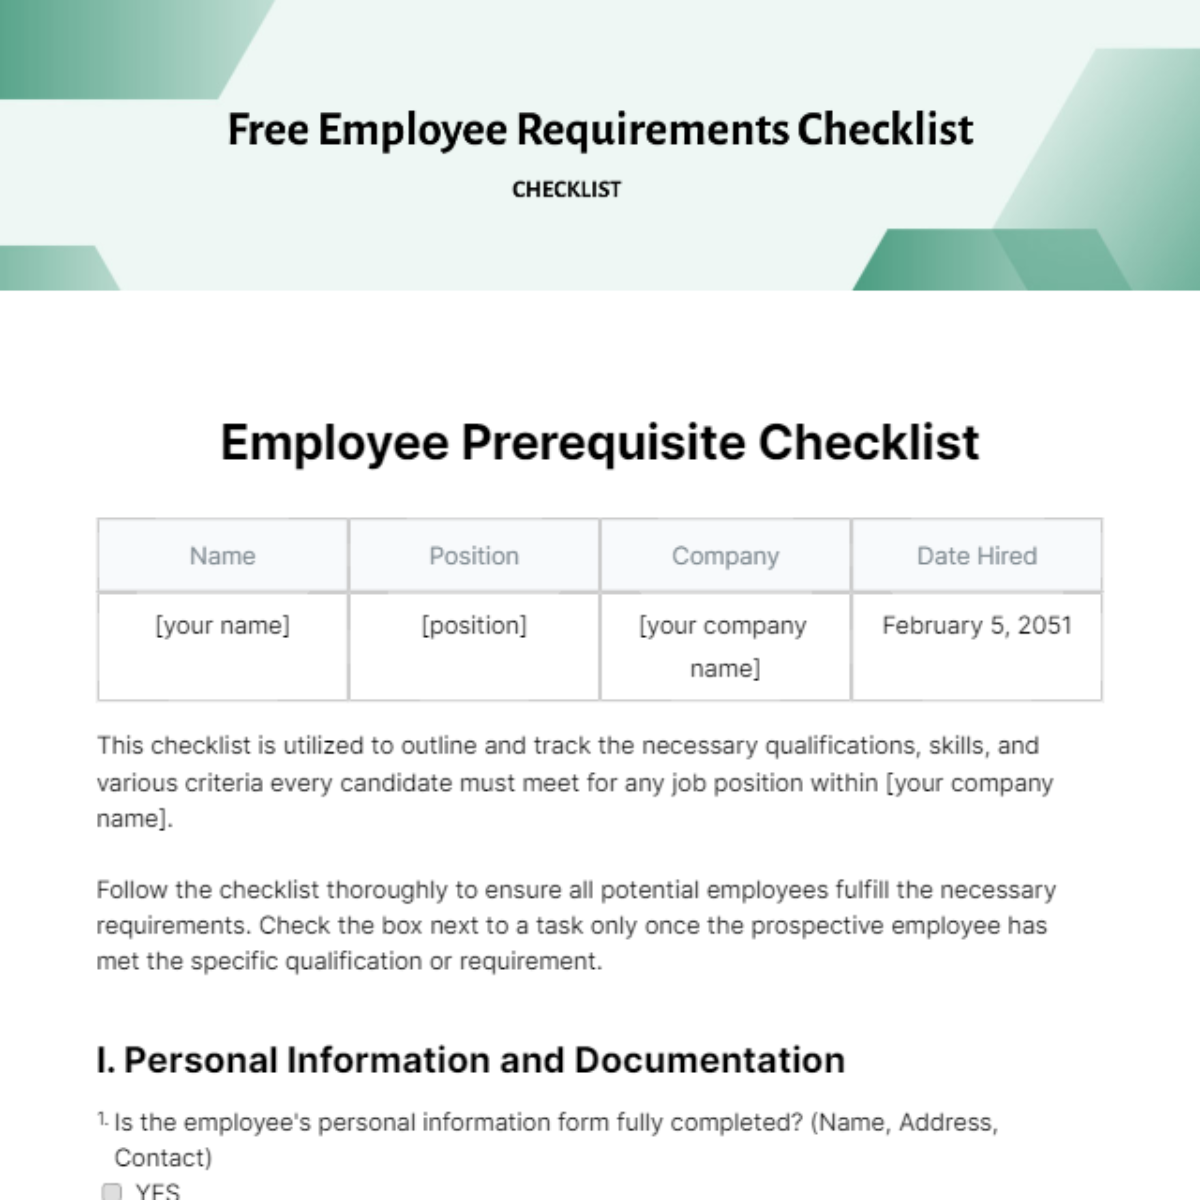 FREE Employee Checklist Templates & Examples - Edit Online & Download